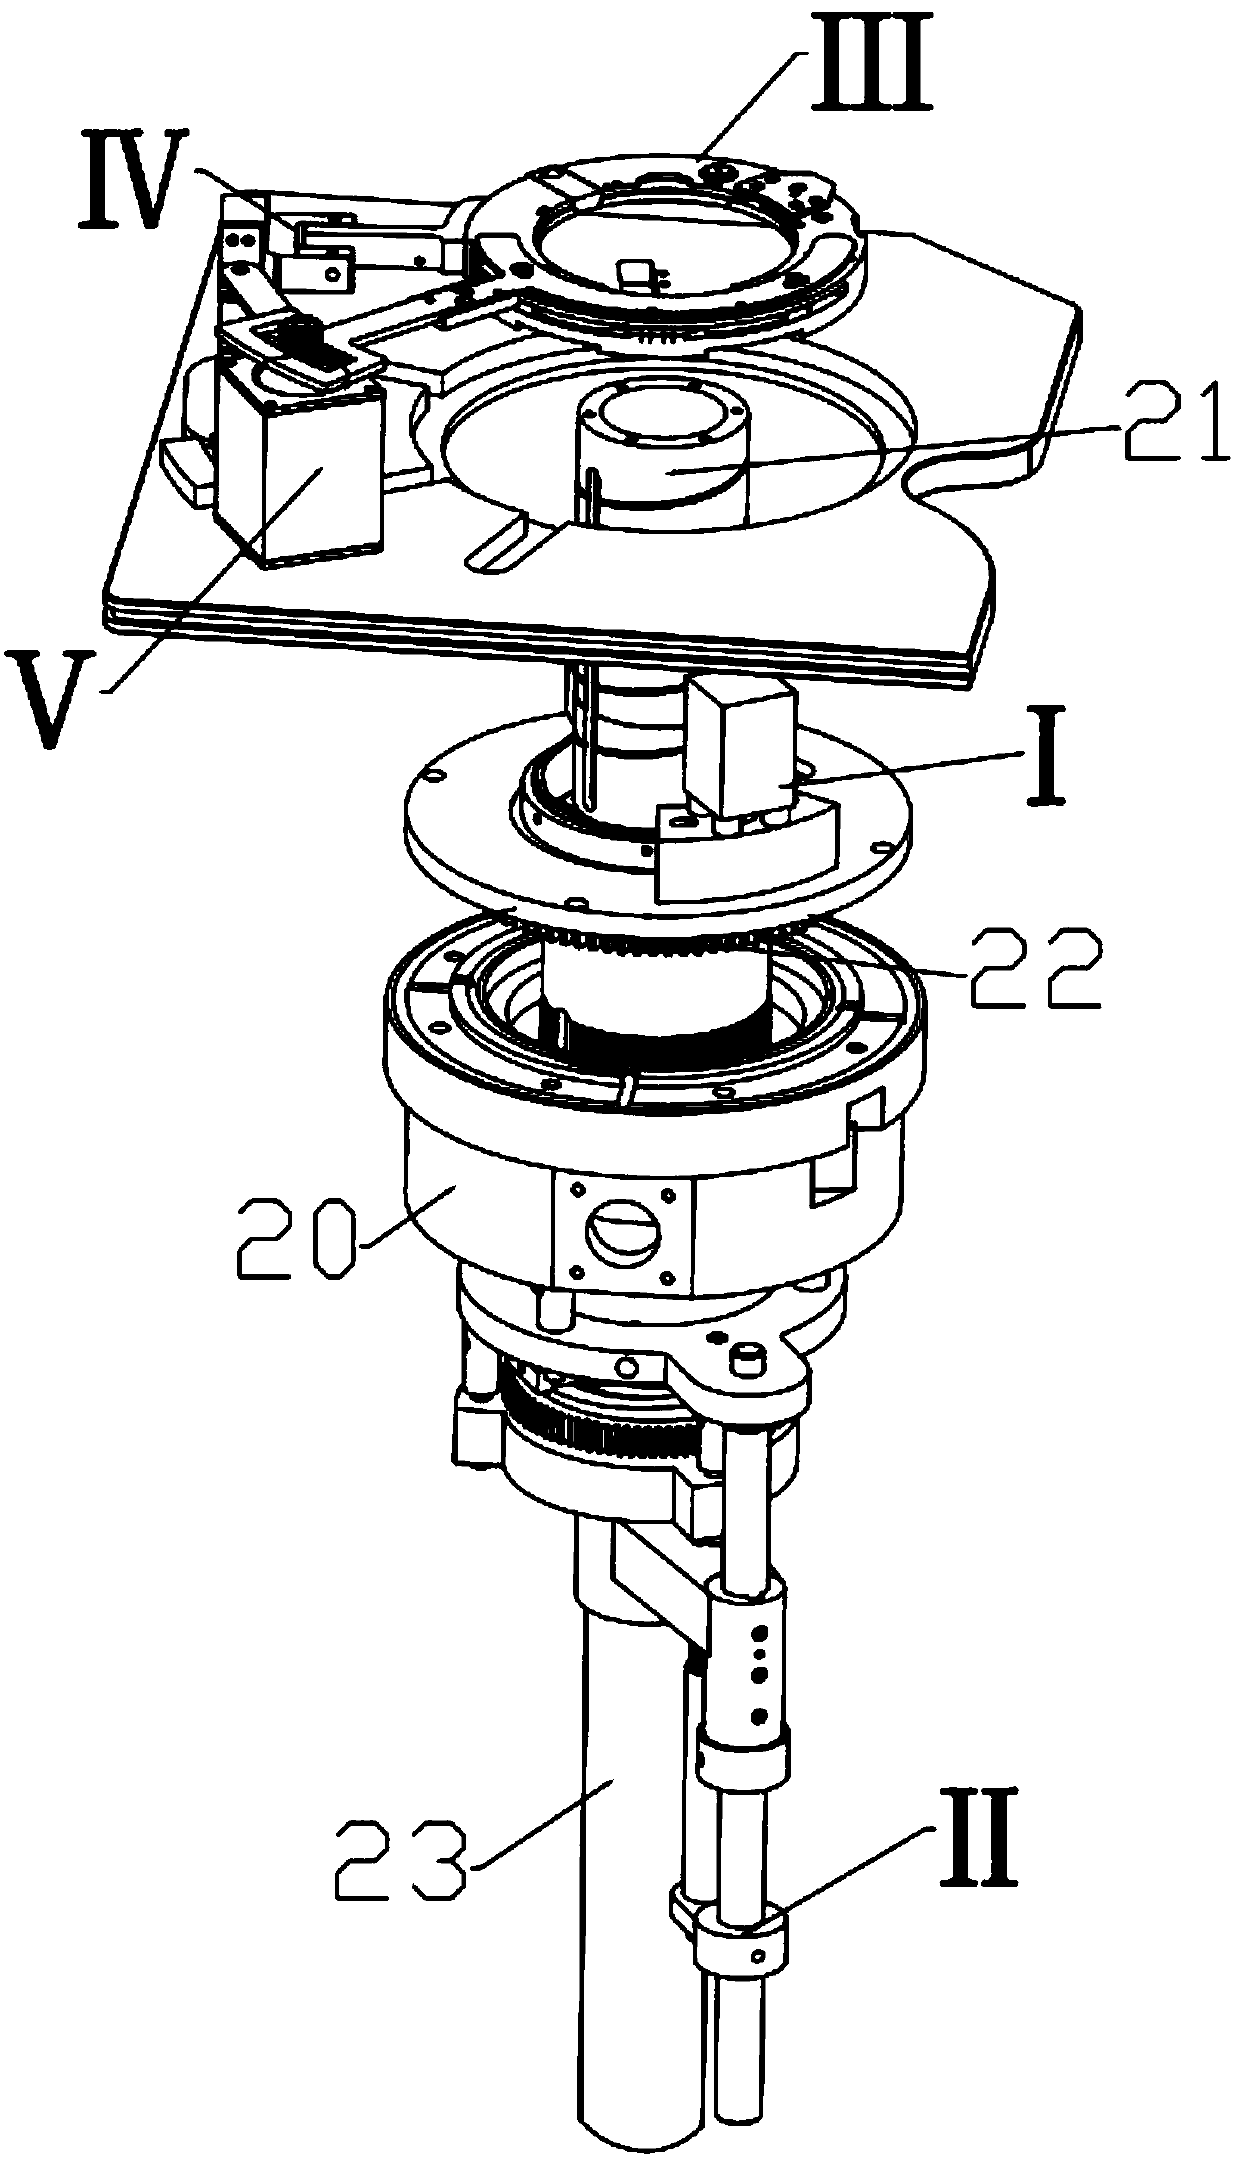 Hosiery body locating and ejecting device with movable sinker cover for integrated hosiery knitting machine